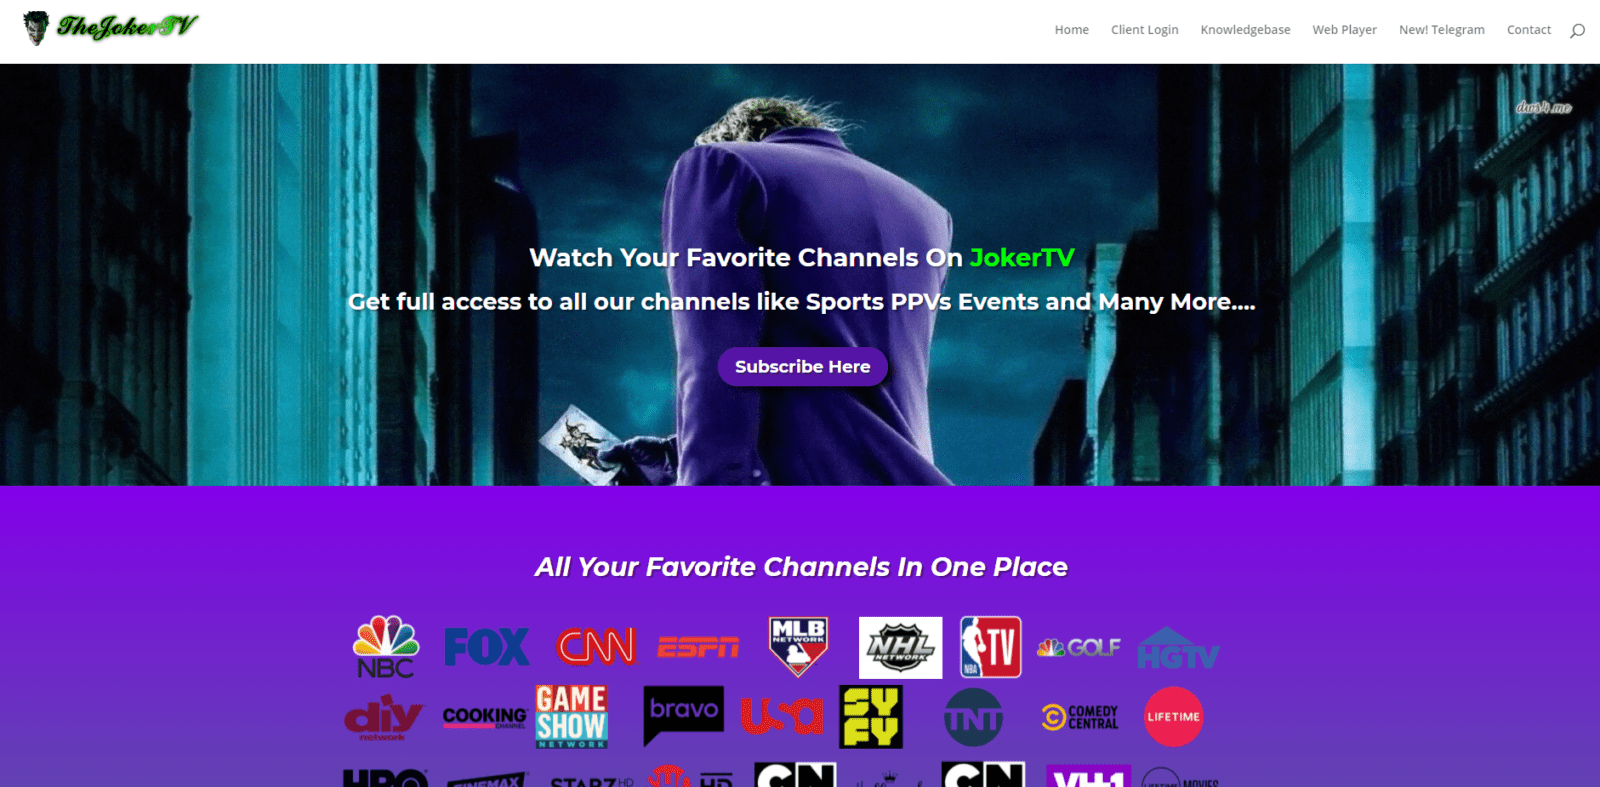 Prior to using the Joker IPTV service, you will need to register for an account on their website.